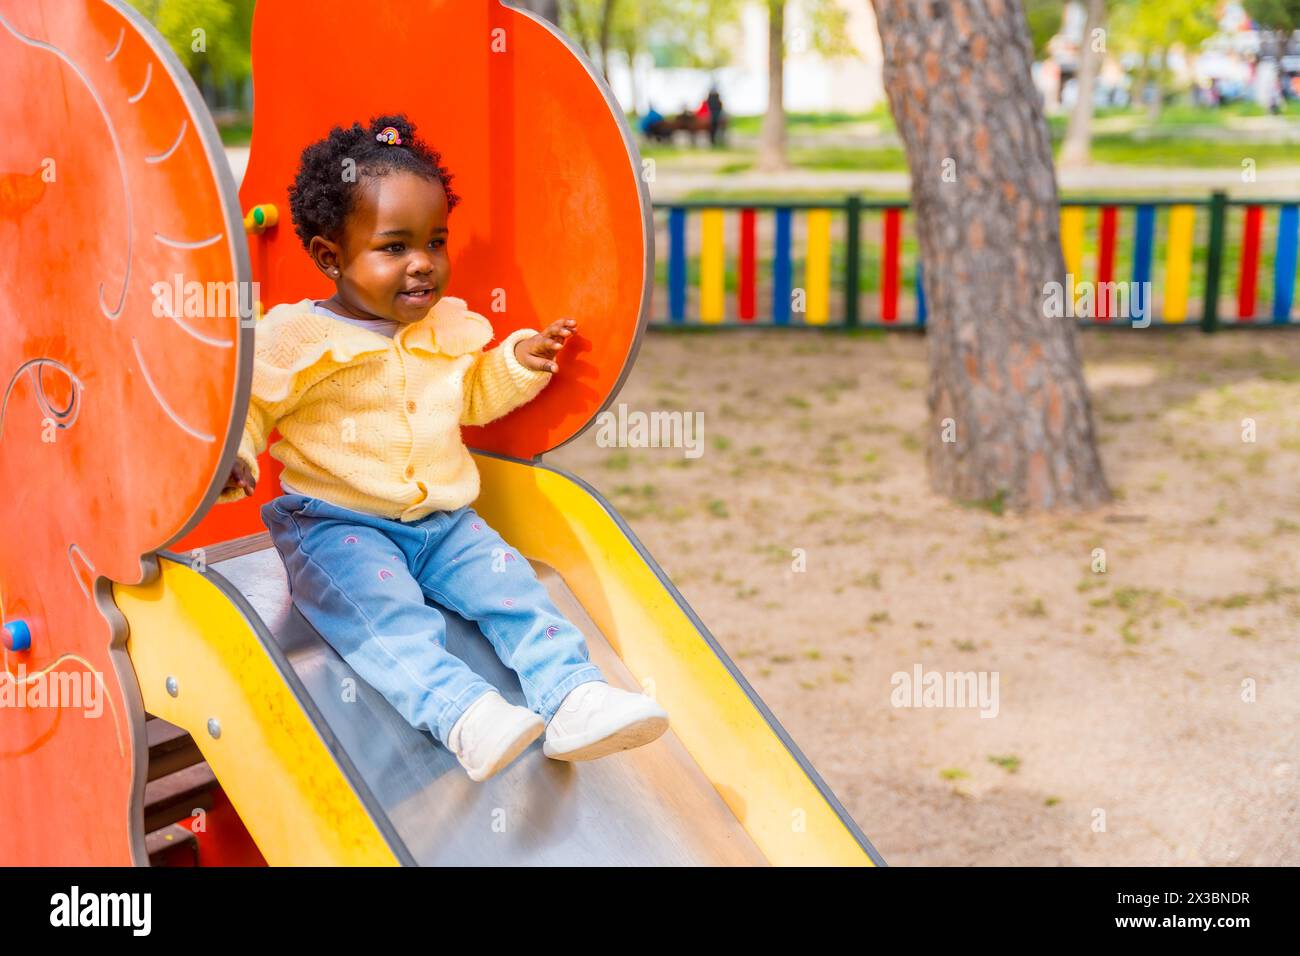 African girl playing on a slide in a public playground Stock Photo